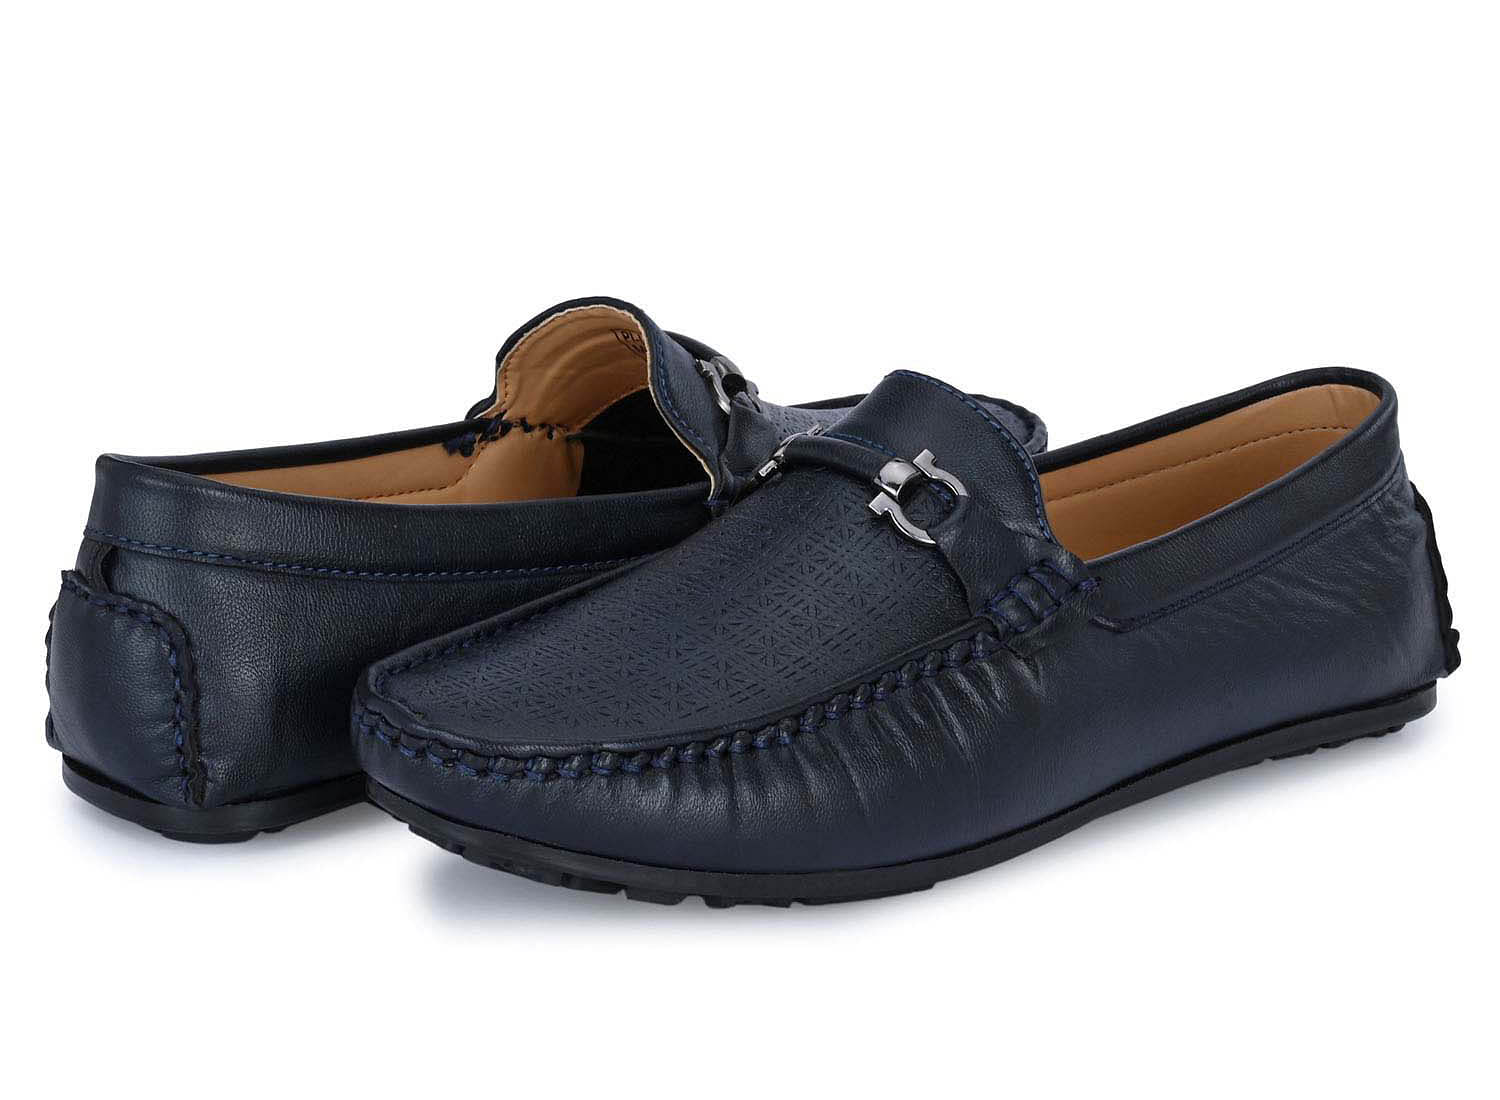 Pair-it Men's Loafers Shoes - Blue-LZ-Loafer105